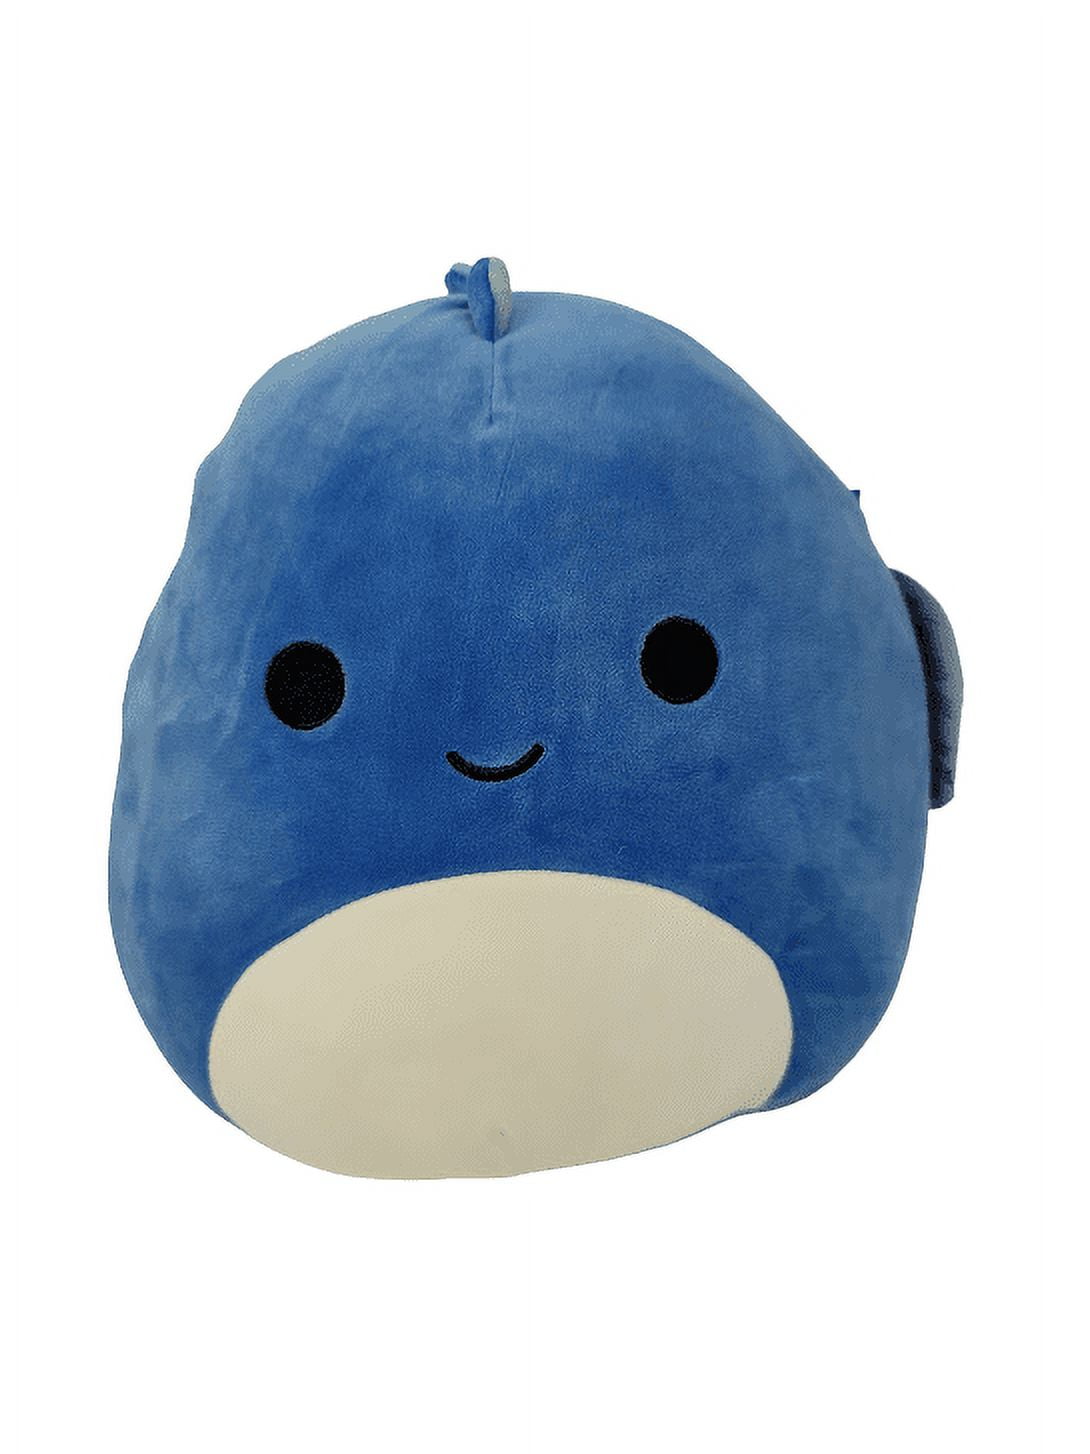 Squishmallows Official Kellytoys Plush 12 Inch Brody the Blue Dinosaur ...